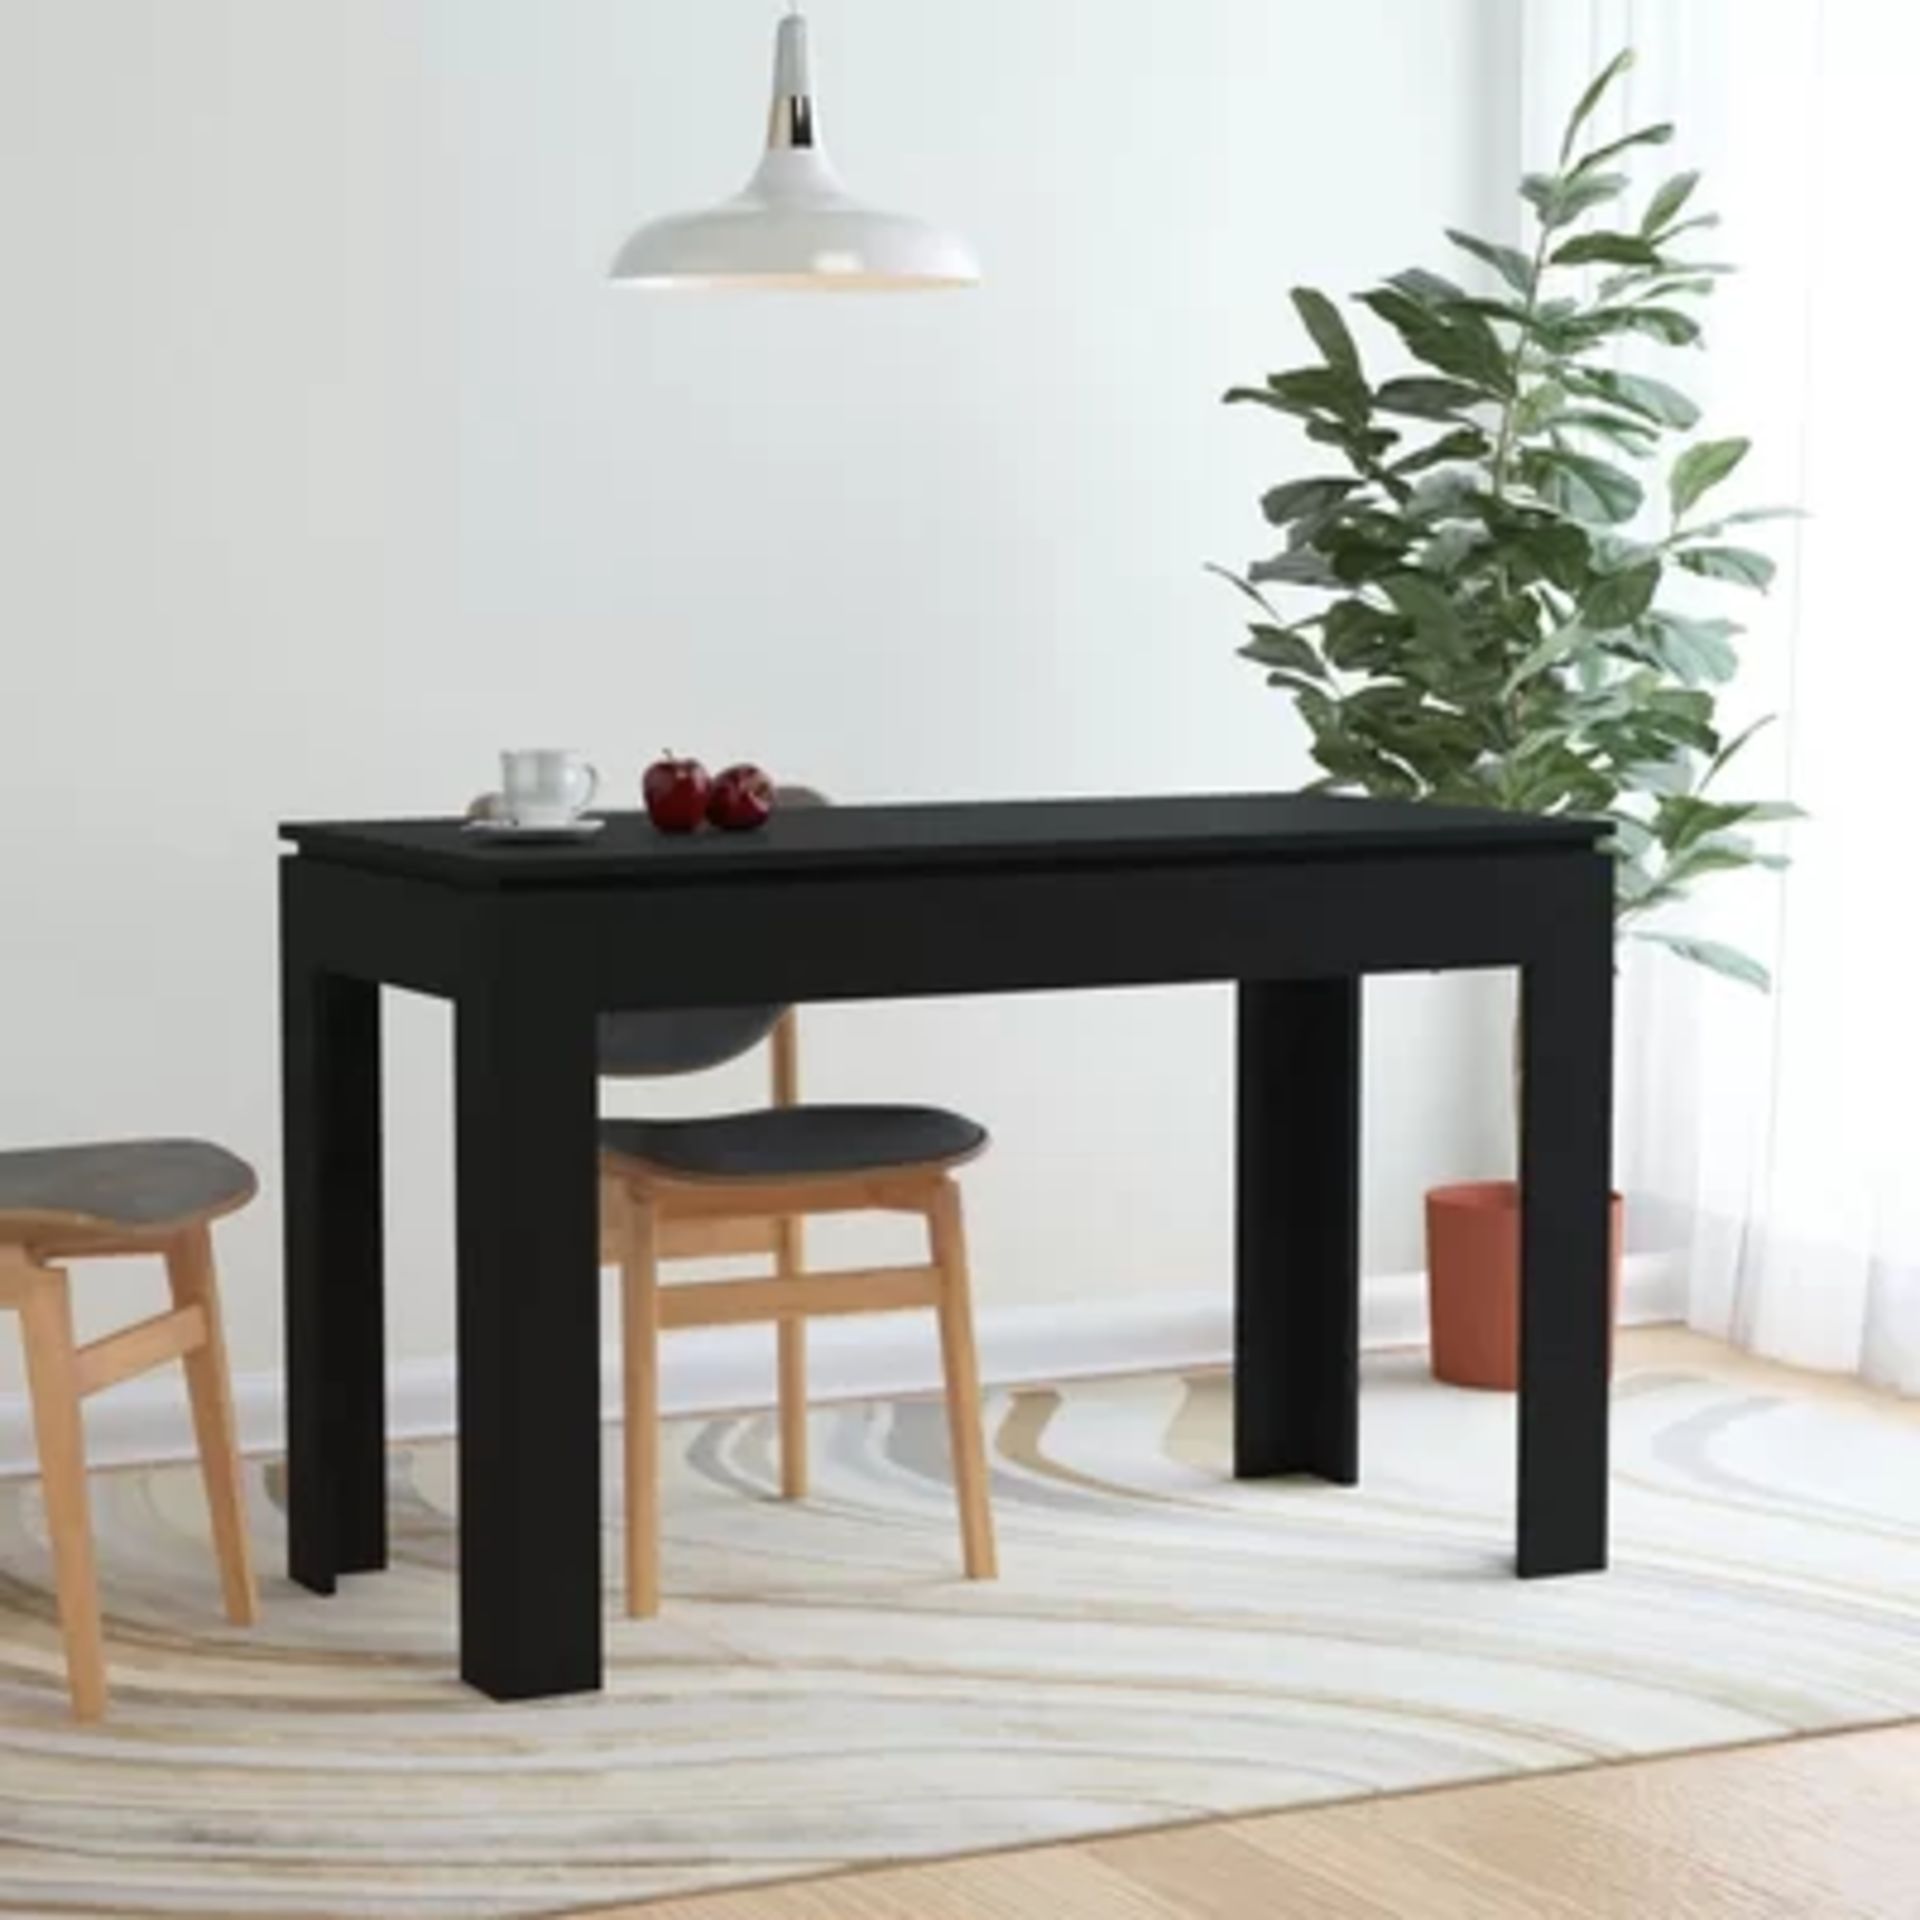 RRP £ 89.99 - Aatos Dining Table Size: H76 x L120 x W60cm, Table Top Colour: Black, Table Base - Image 3 of 4